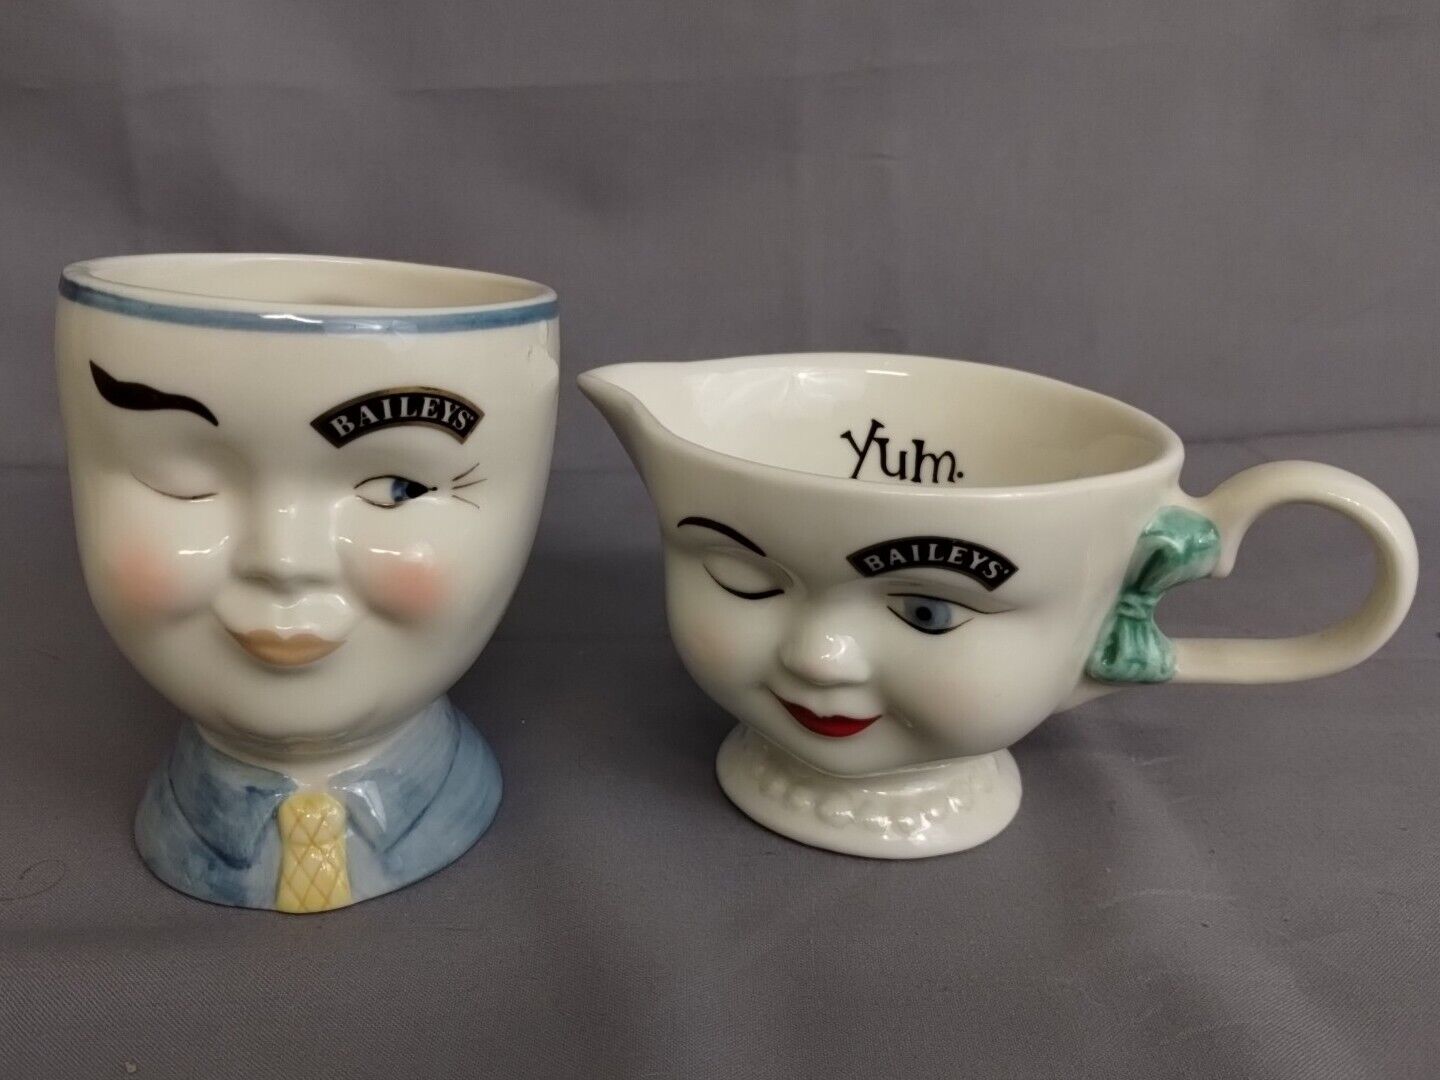 Retro Vintage Winking Eye Tea Cups Pair Limited Edition Bailey's Ceramic 1996-97